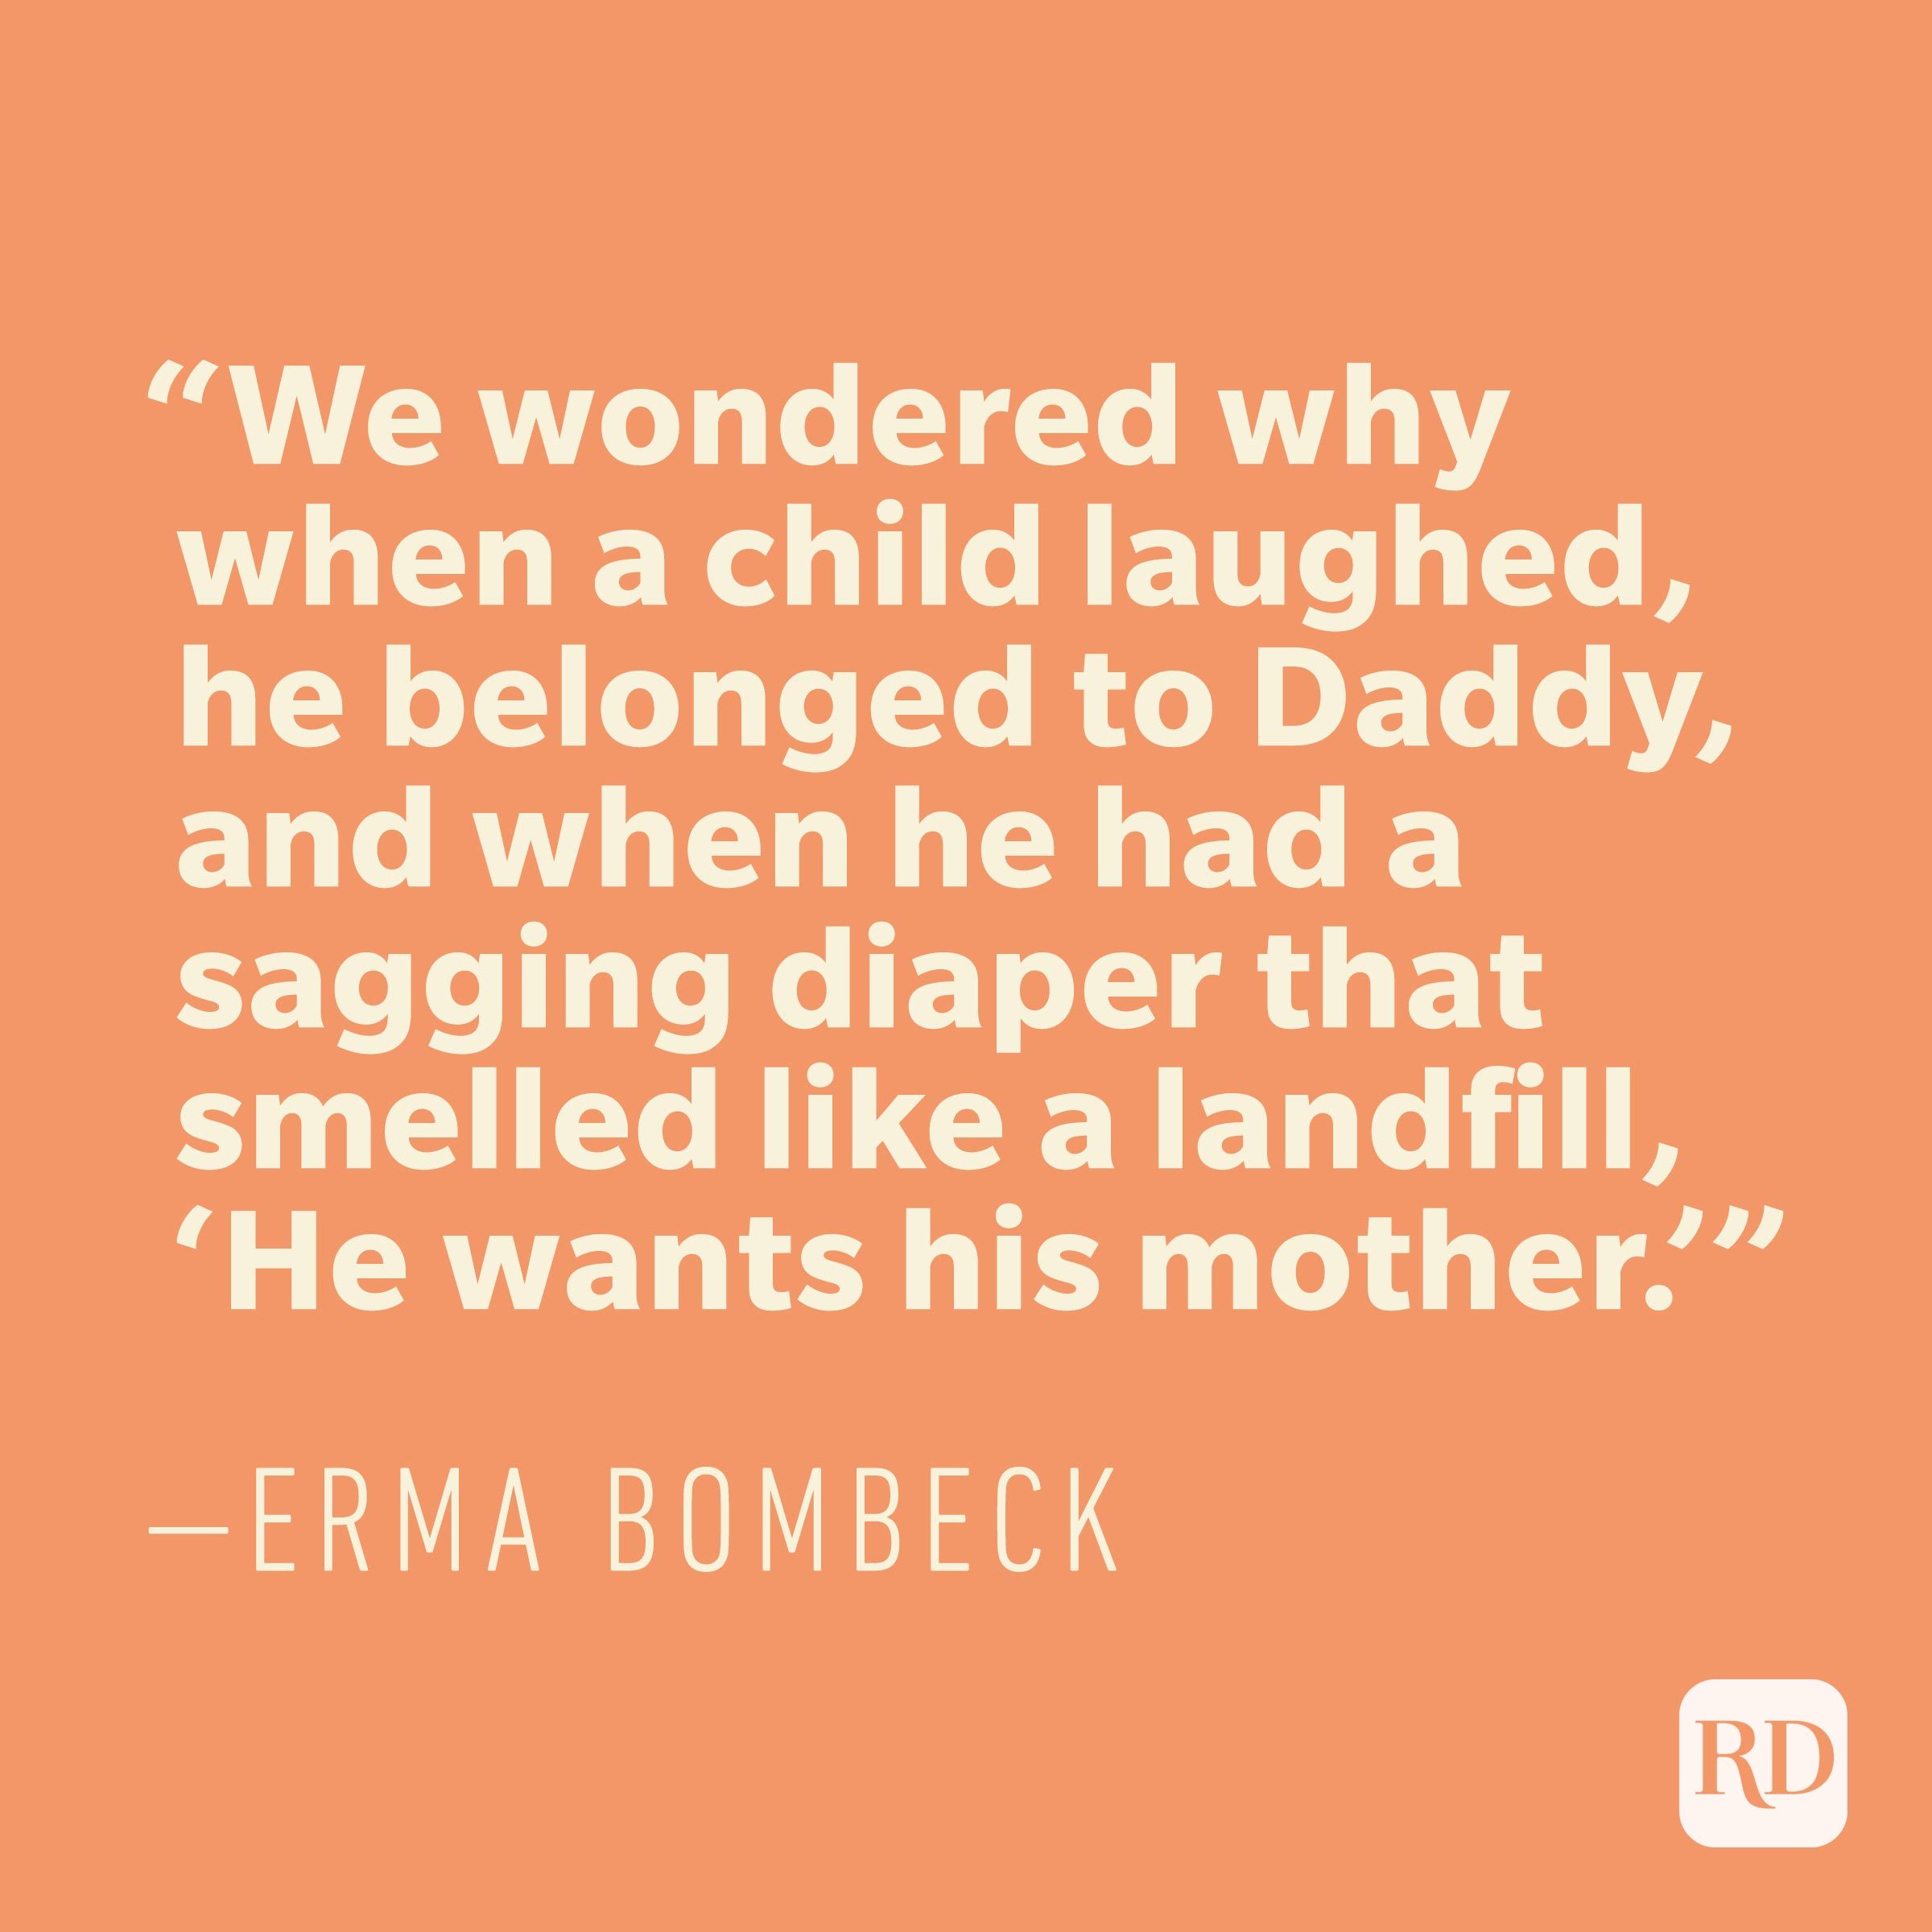 20 Funny Dad Quotes for Father's Day 2021 | Reader's Digest